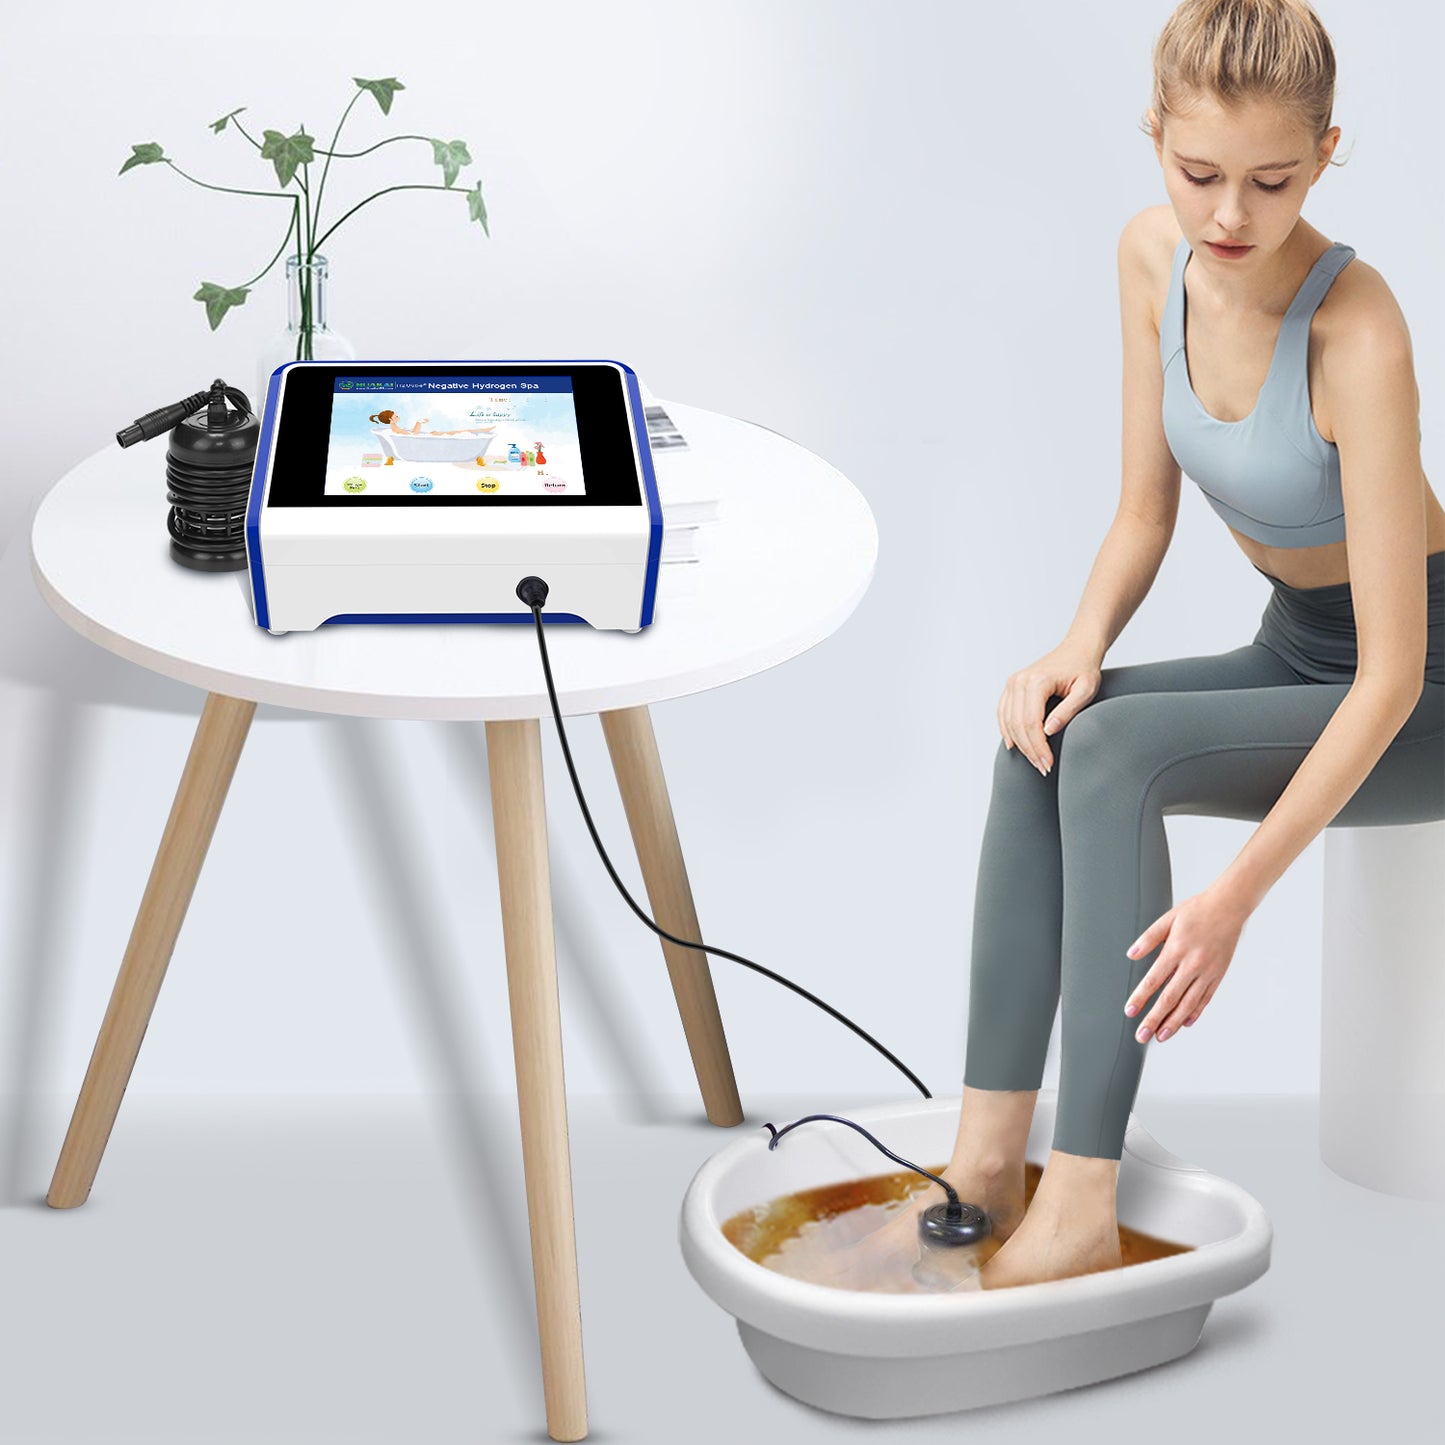 WL-818 Home Use Ionic Foot Detox Spa Machine Easy to Operate Foot Detox Device